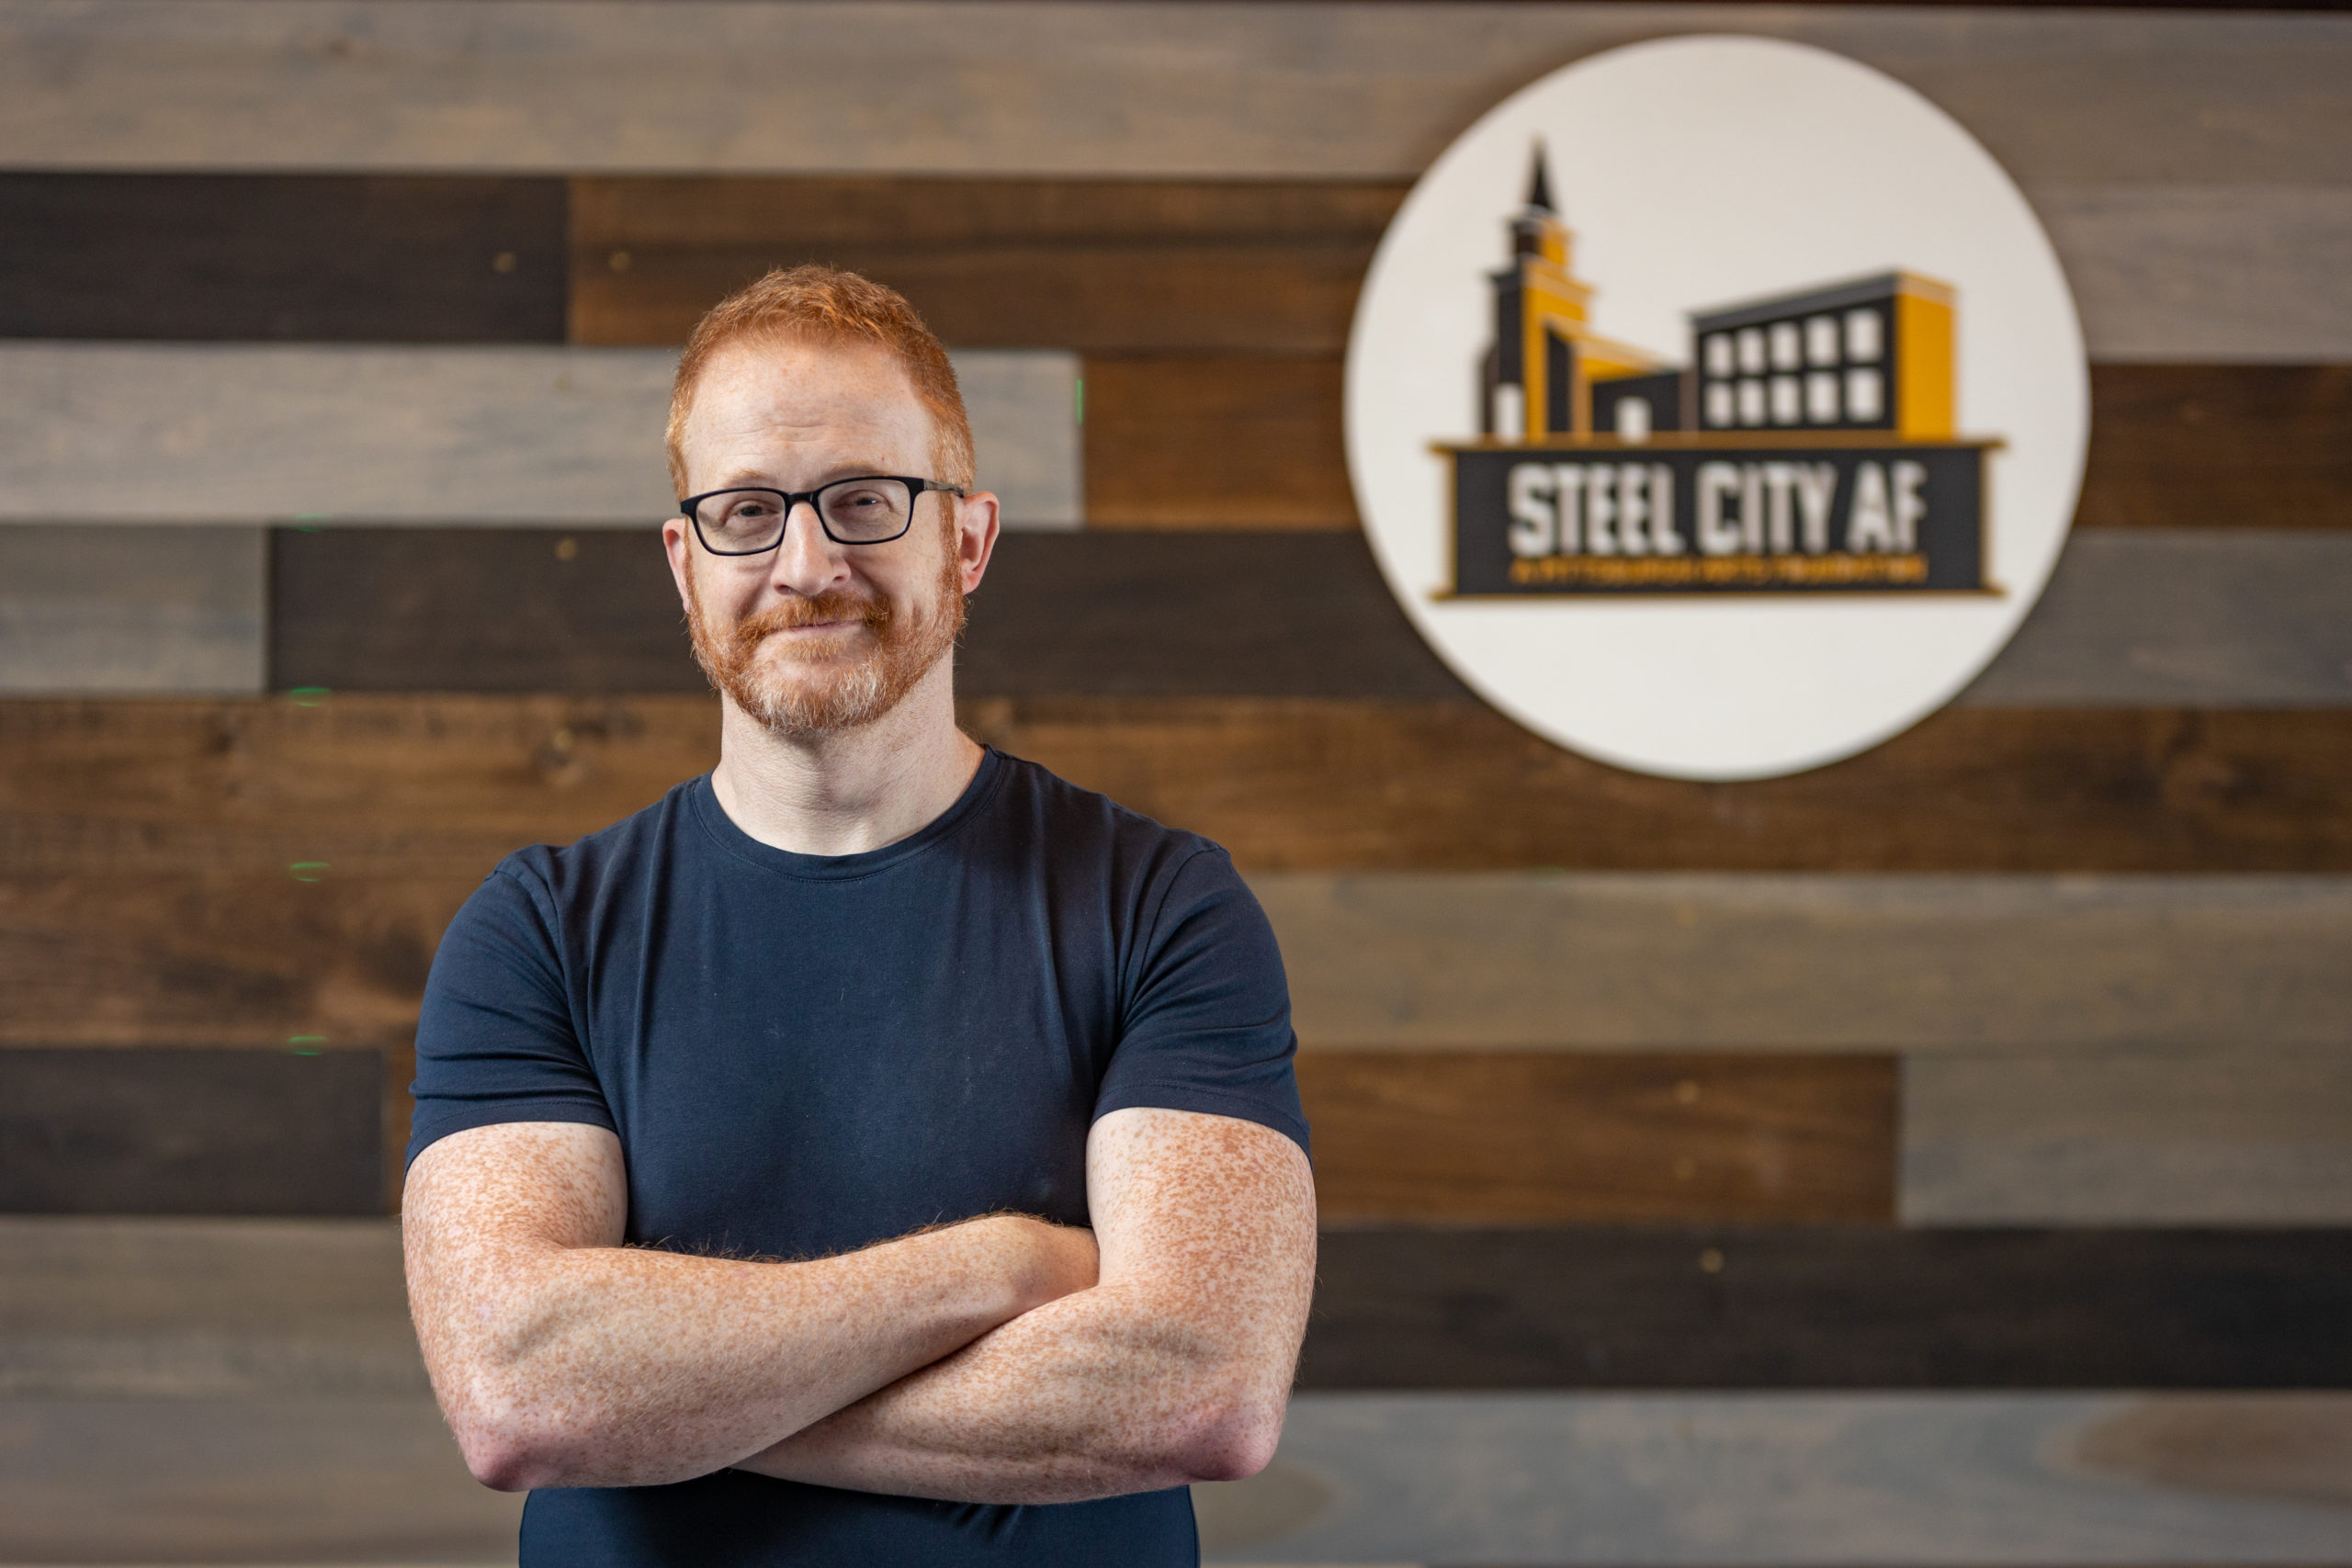 Steve Hofstetter is a redheaded man with a short beard and glasses.